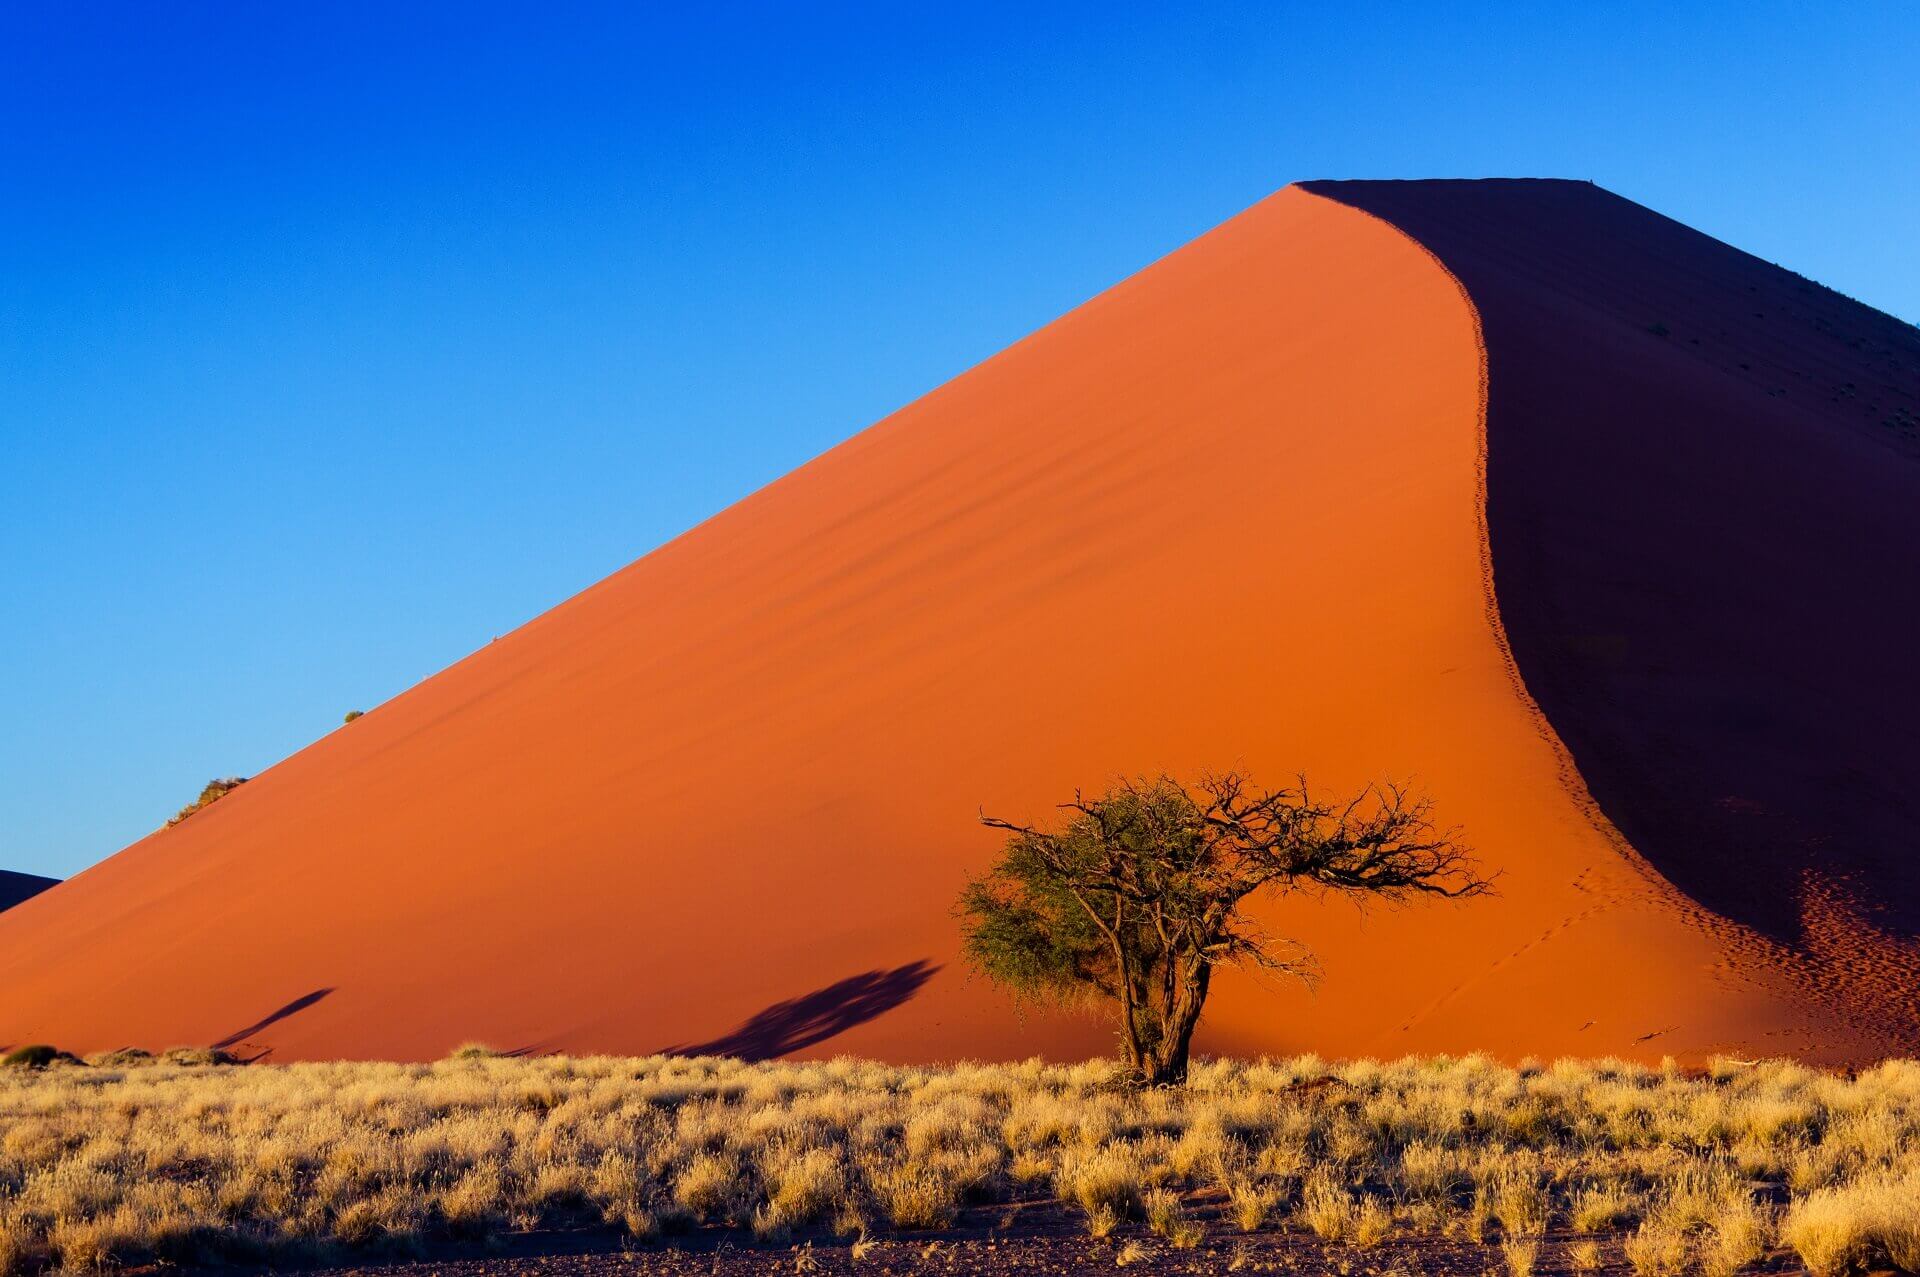 Experience wilderness in Namibia with NamibStar